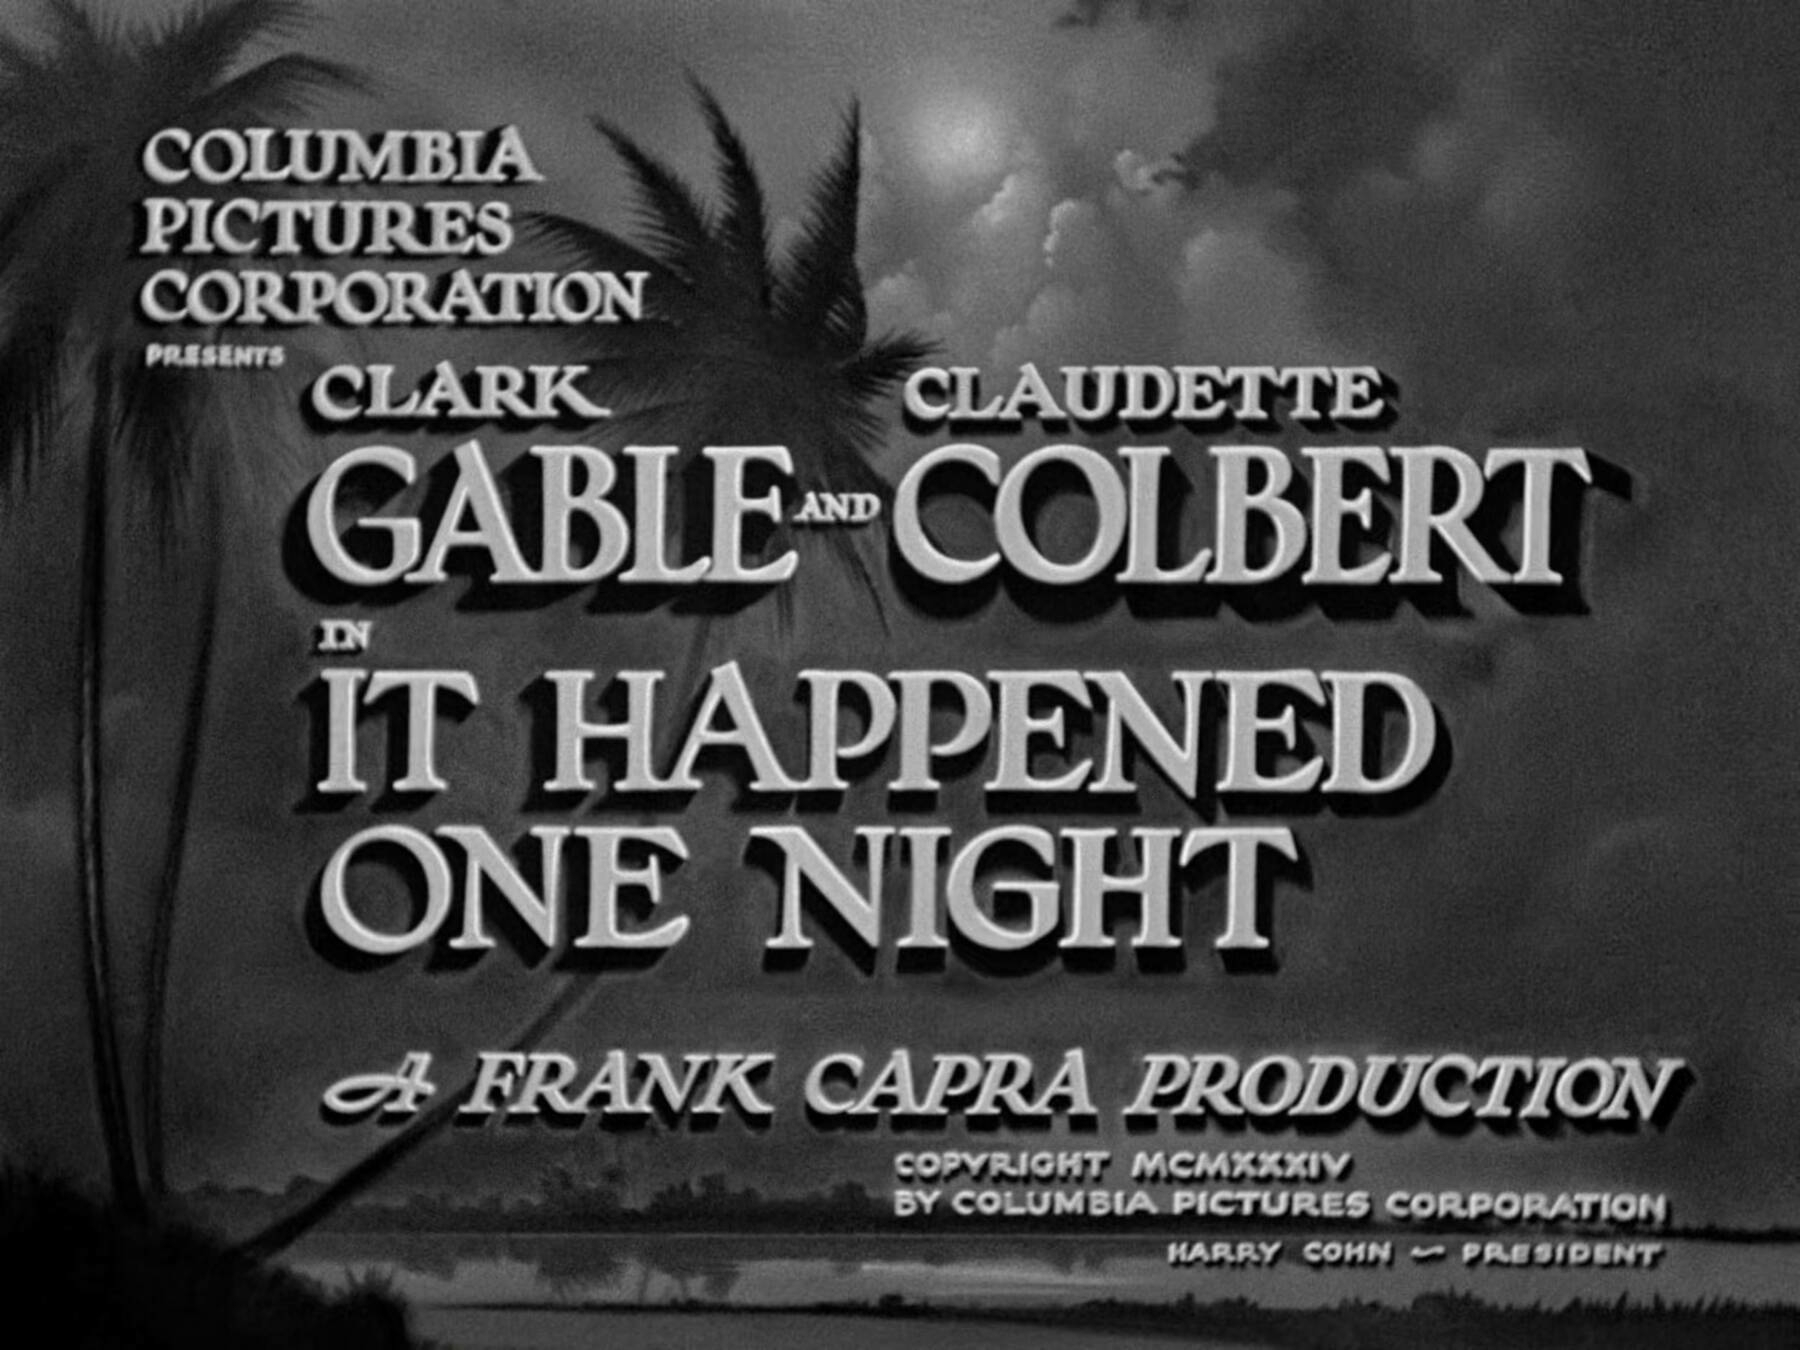 The title card for the film, It Happened One Night.